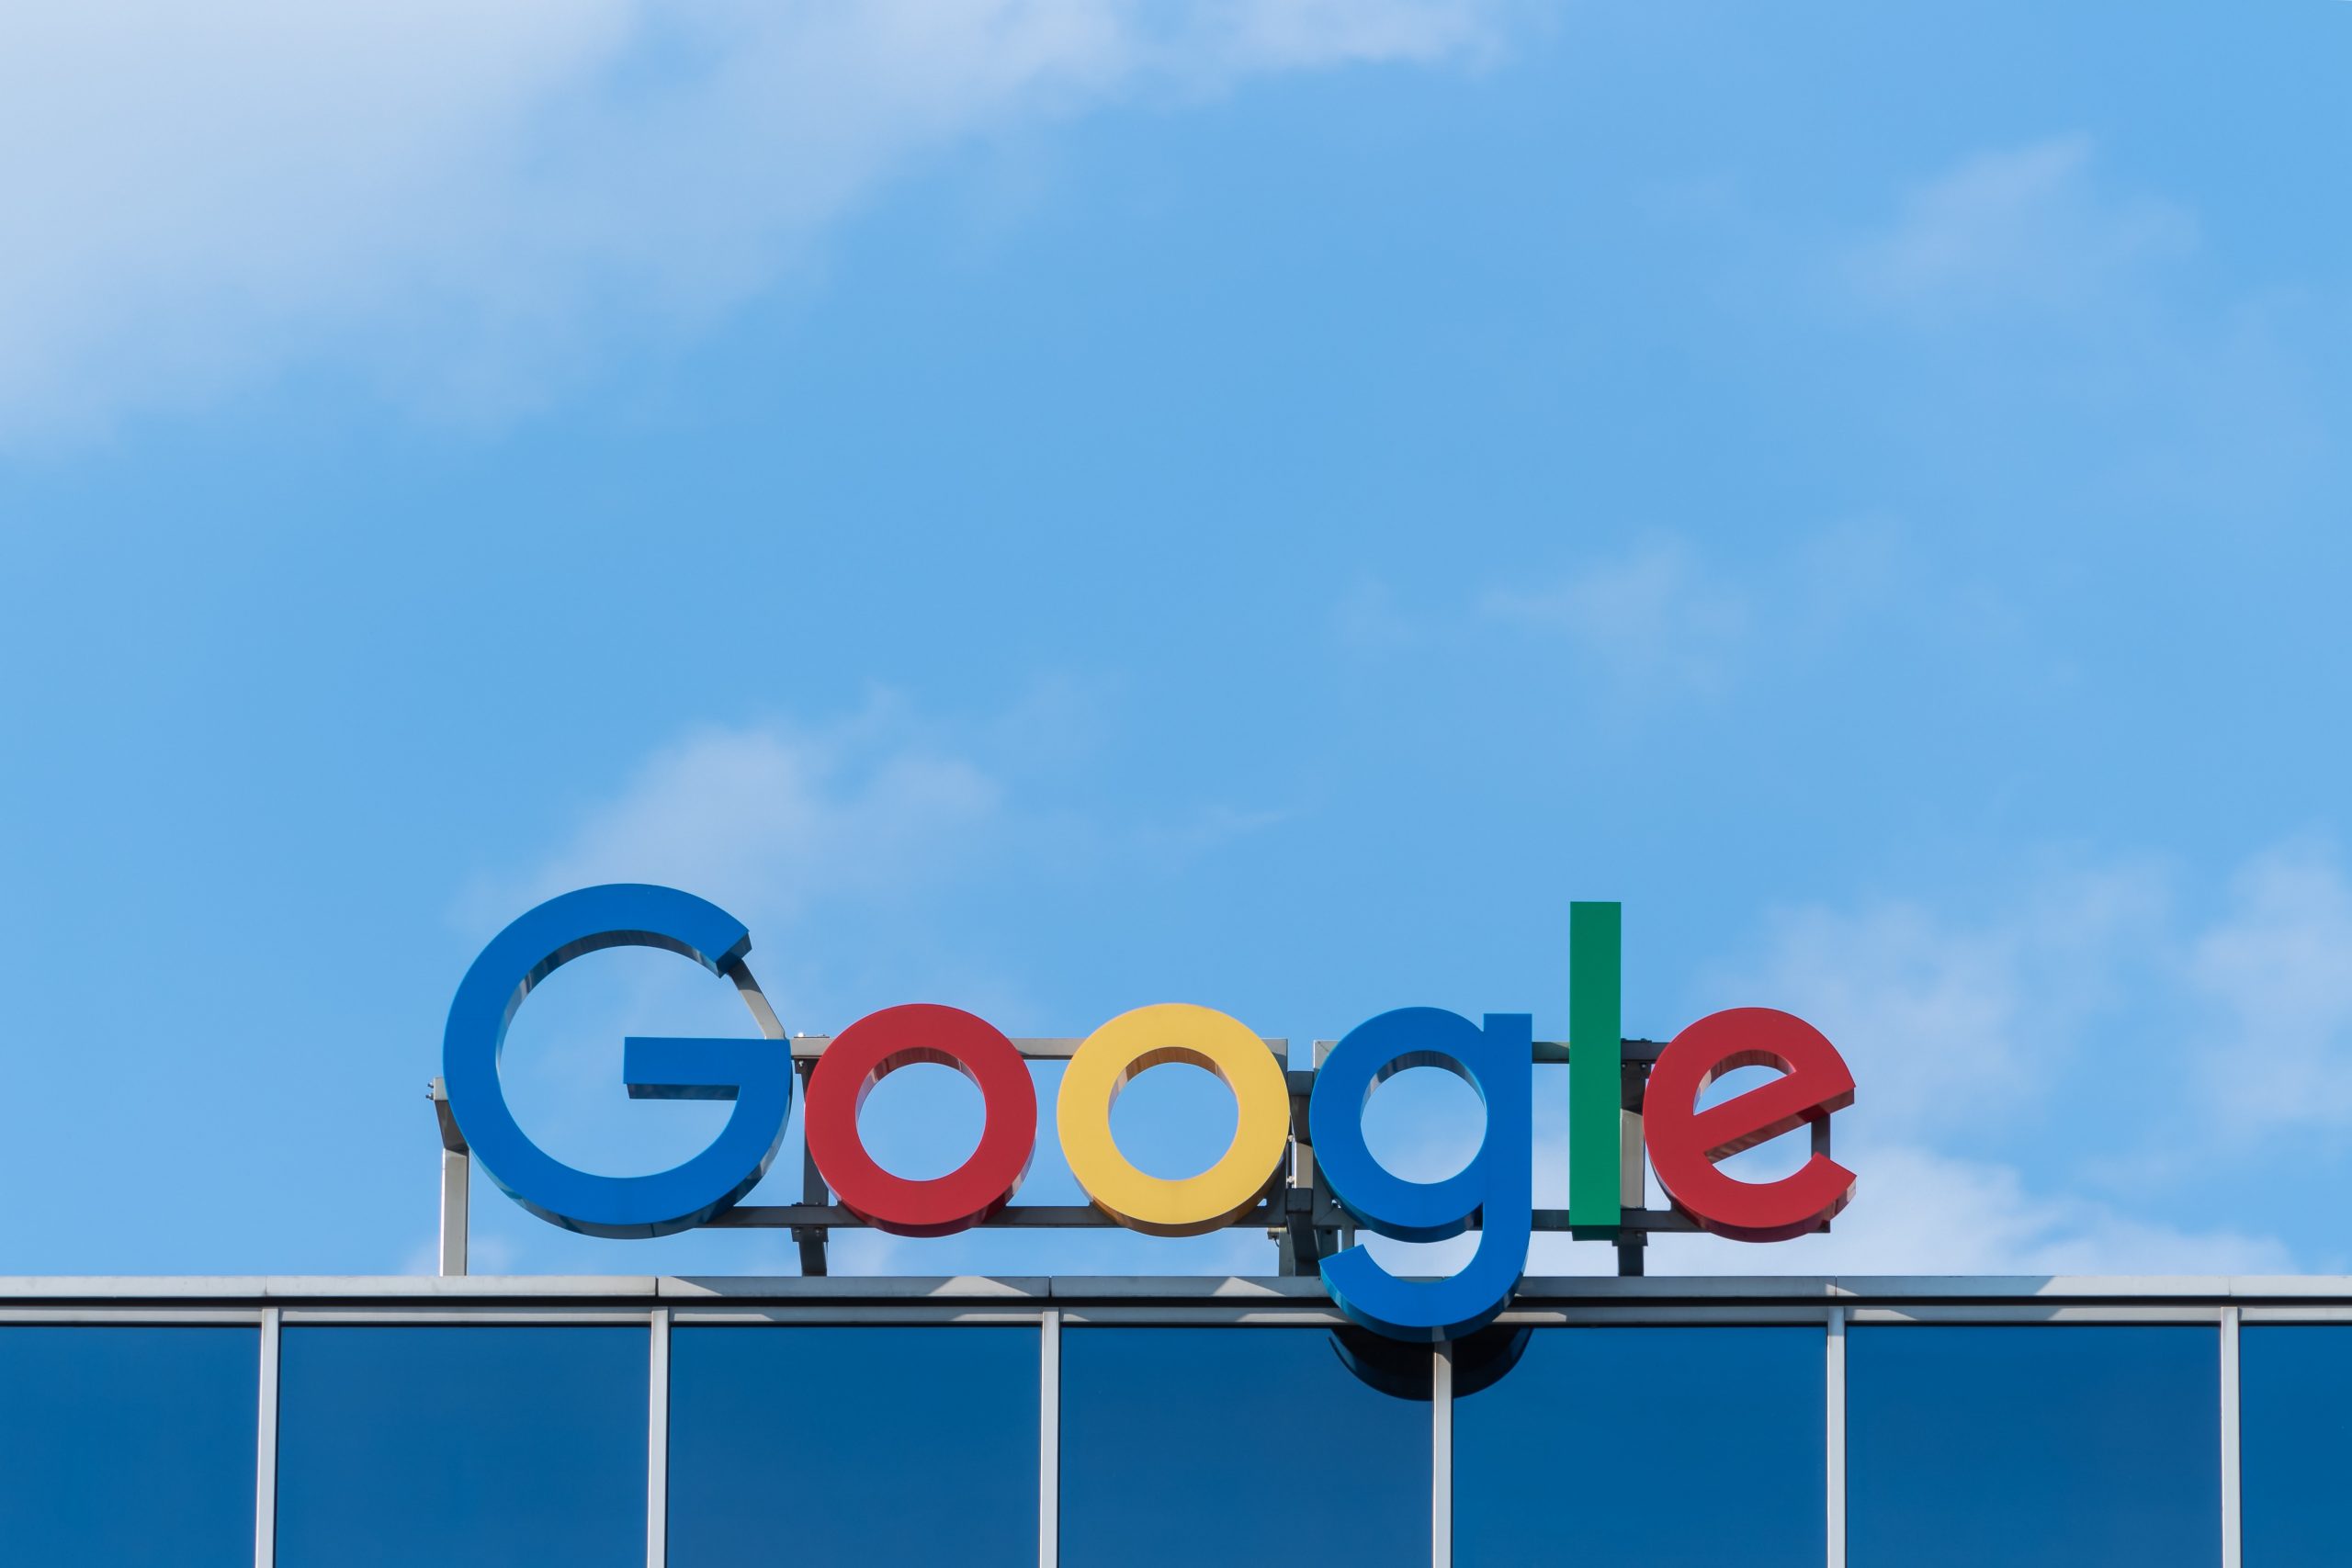 Govt, Google to strategically collaborate to provide opportunities for 300,000 by 2026